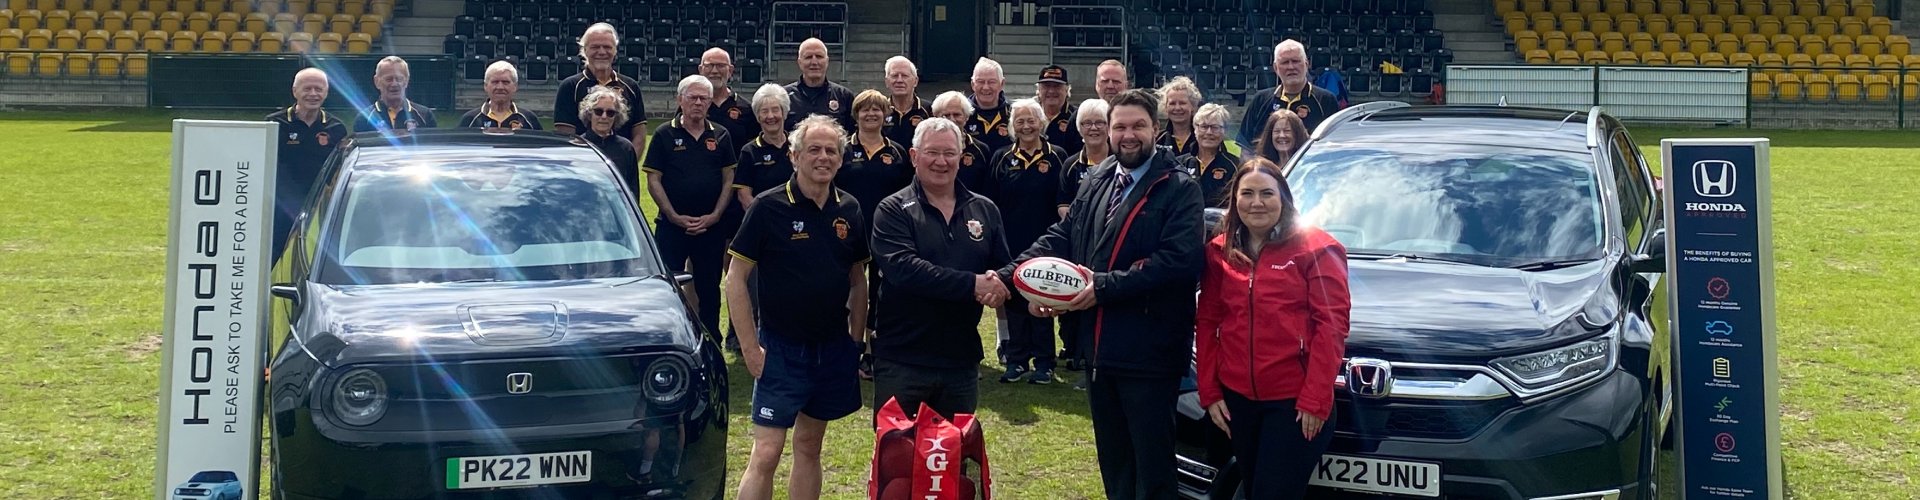 Kendal Honda Donate World Record Rugby Balls to Kendal Rugby Club